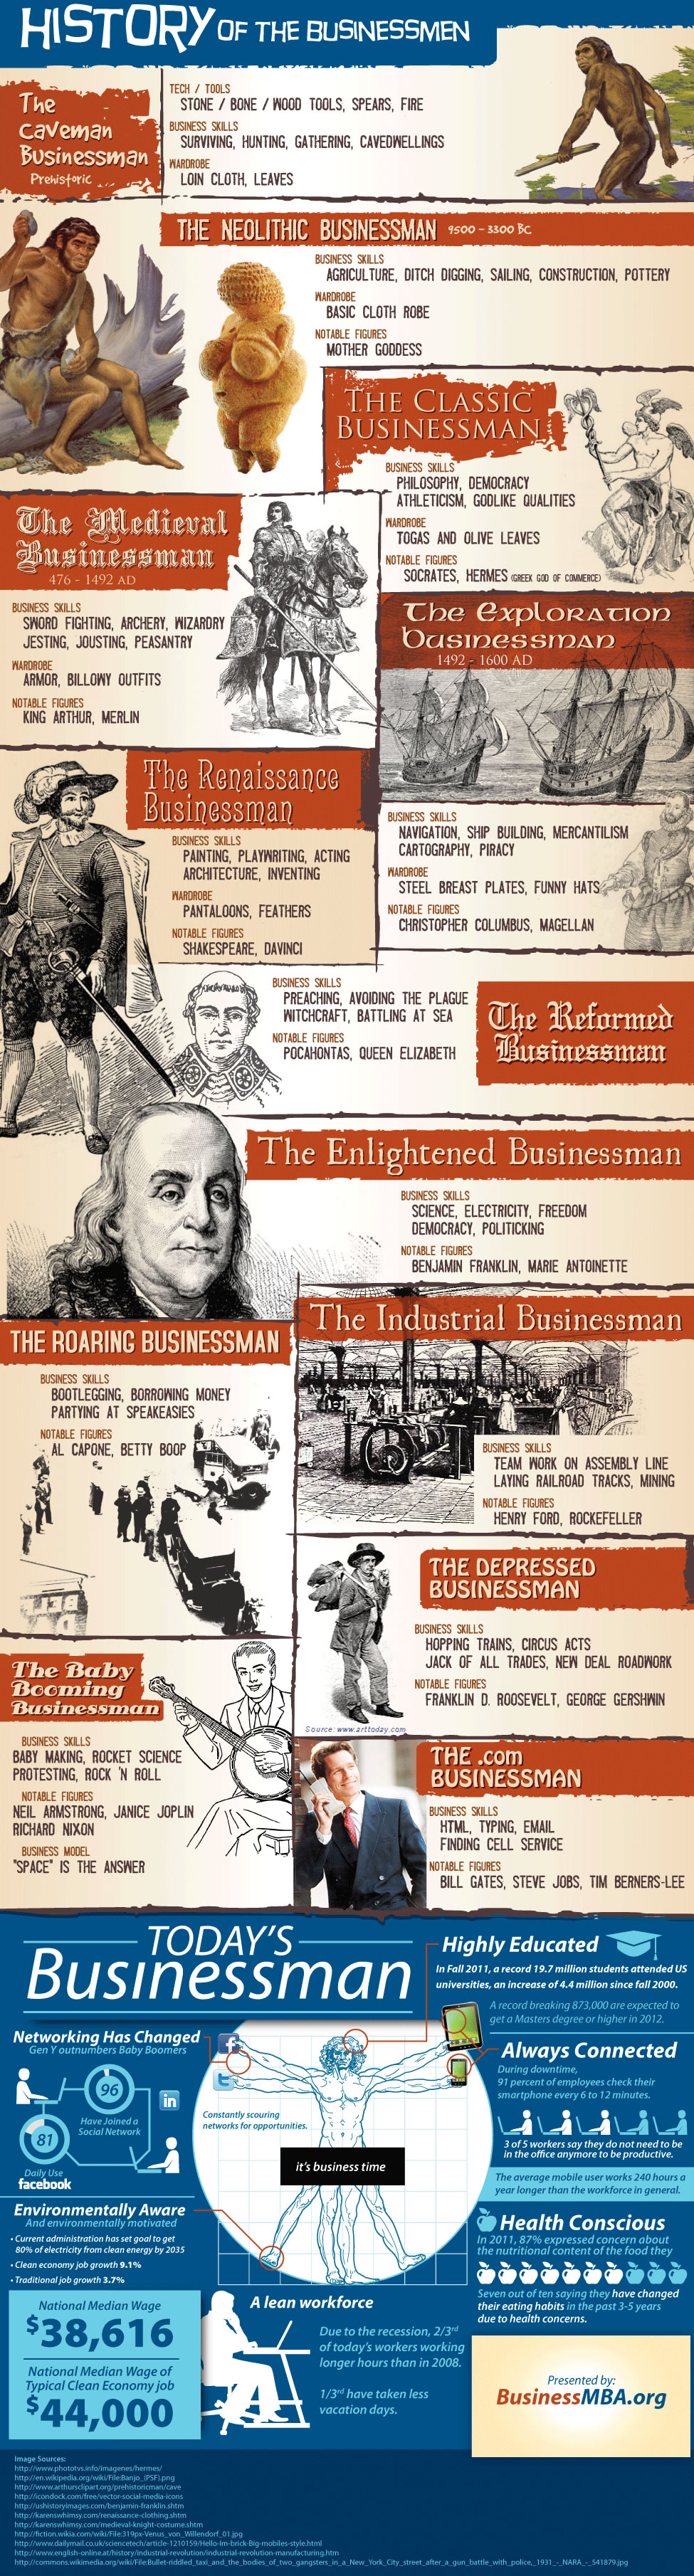 History of the Businessmen